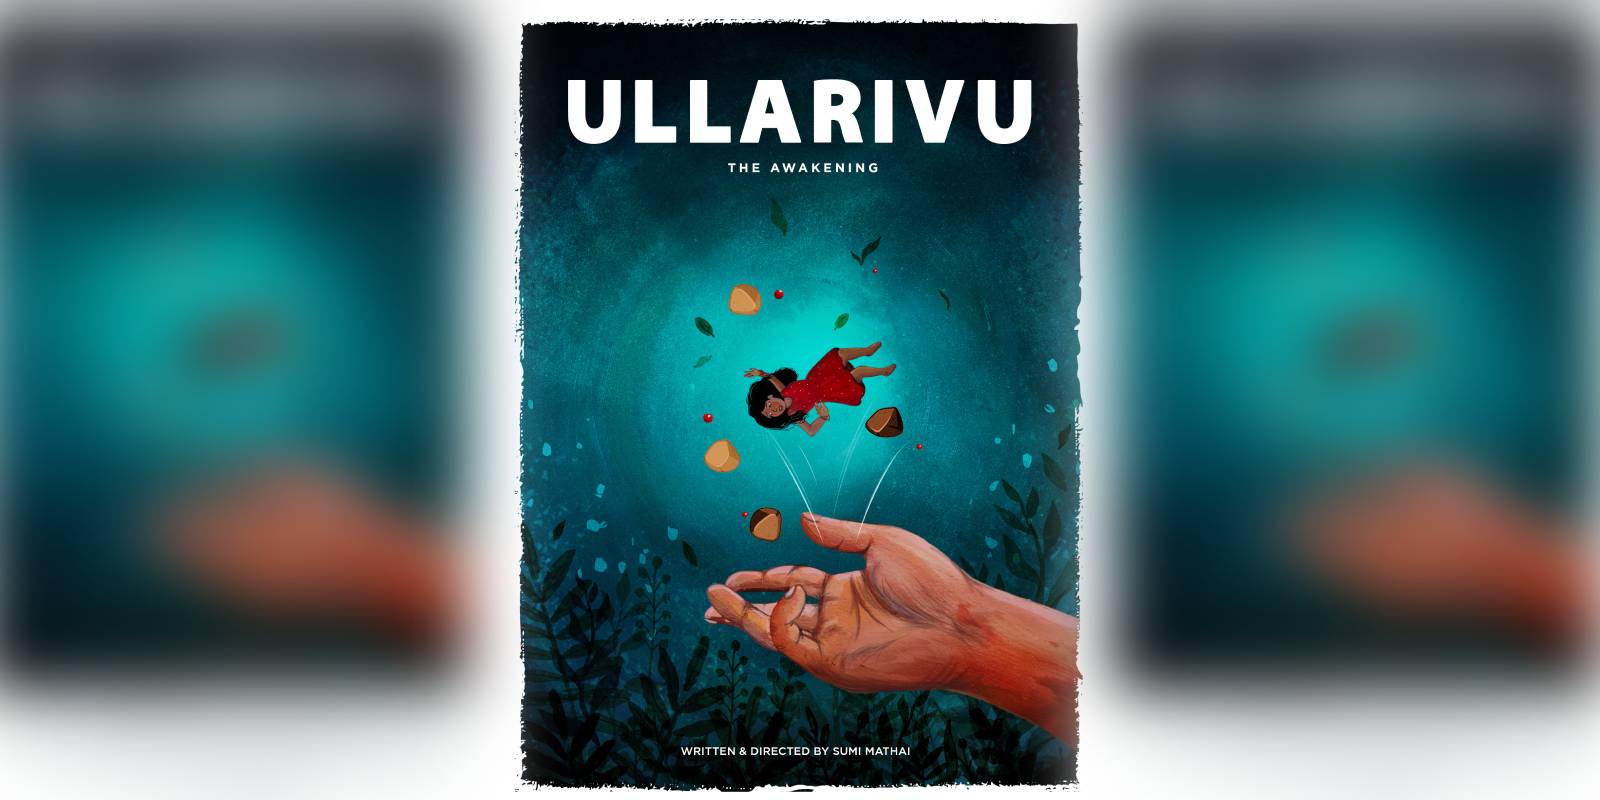 A poster of the film Ullarivu